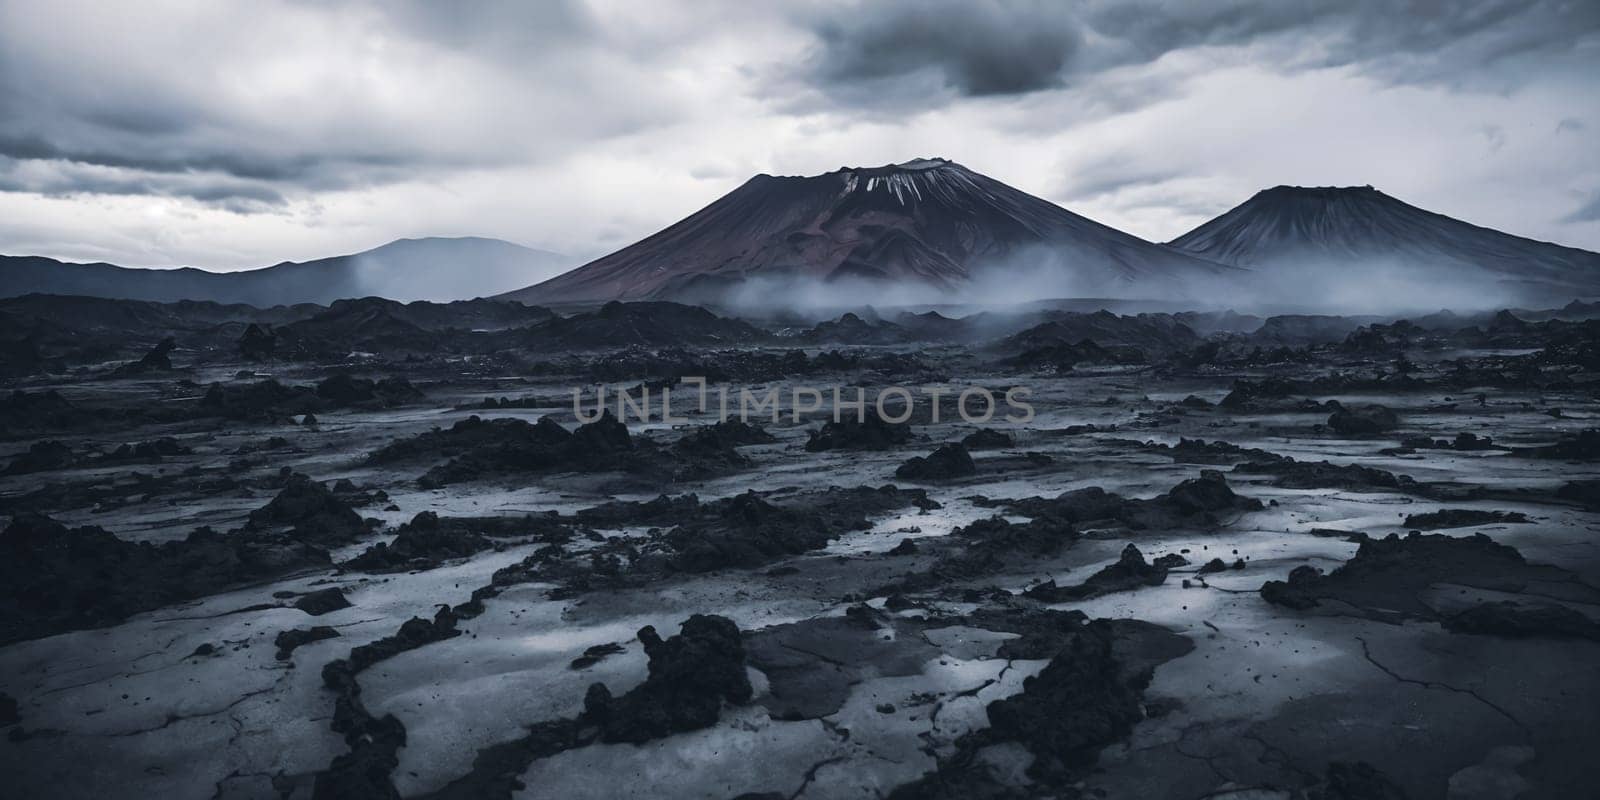 The aftermath of a volcanic eruption with layers of ash covering the surrounding landscape, creating an eerie and monochromatic scene that portrays the devastation caused by the event. Panorama